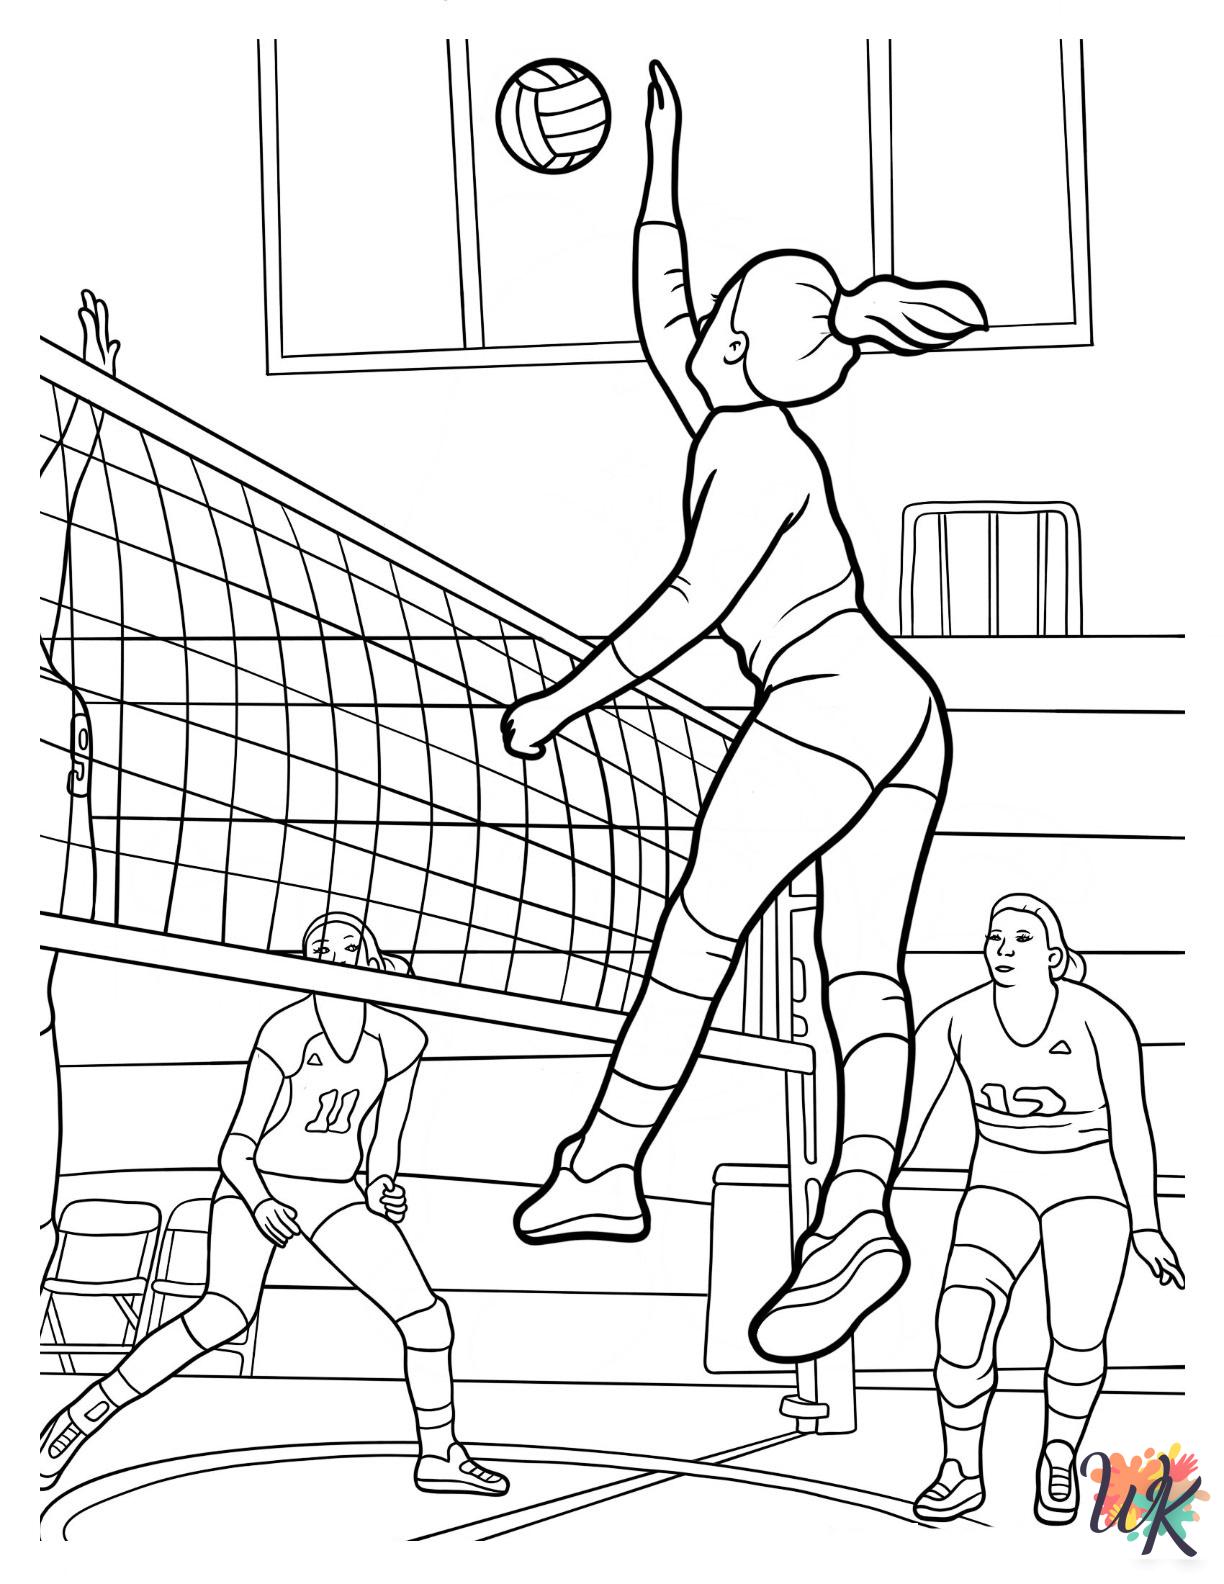 Volleyball coloring pages for adults pdf